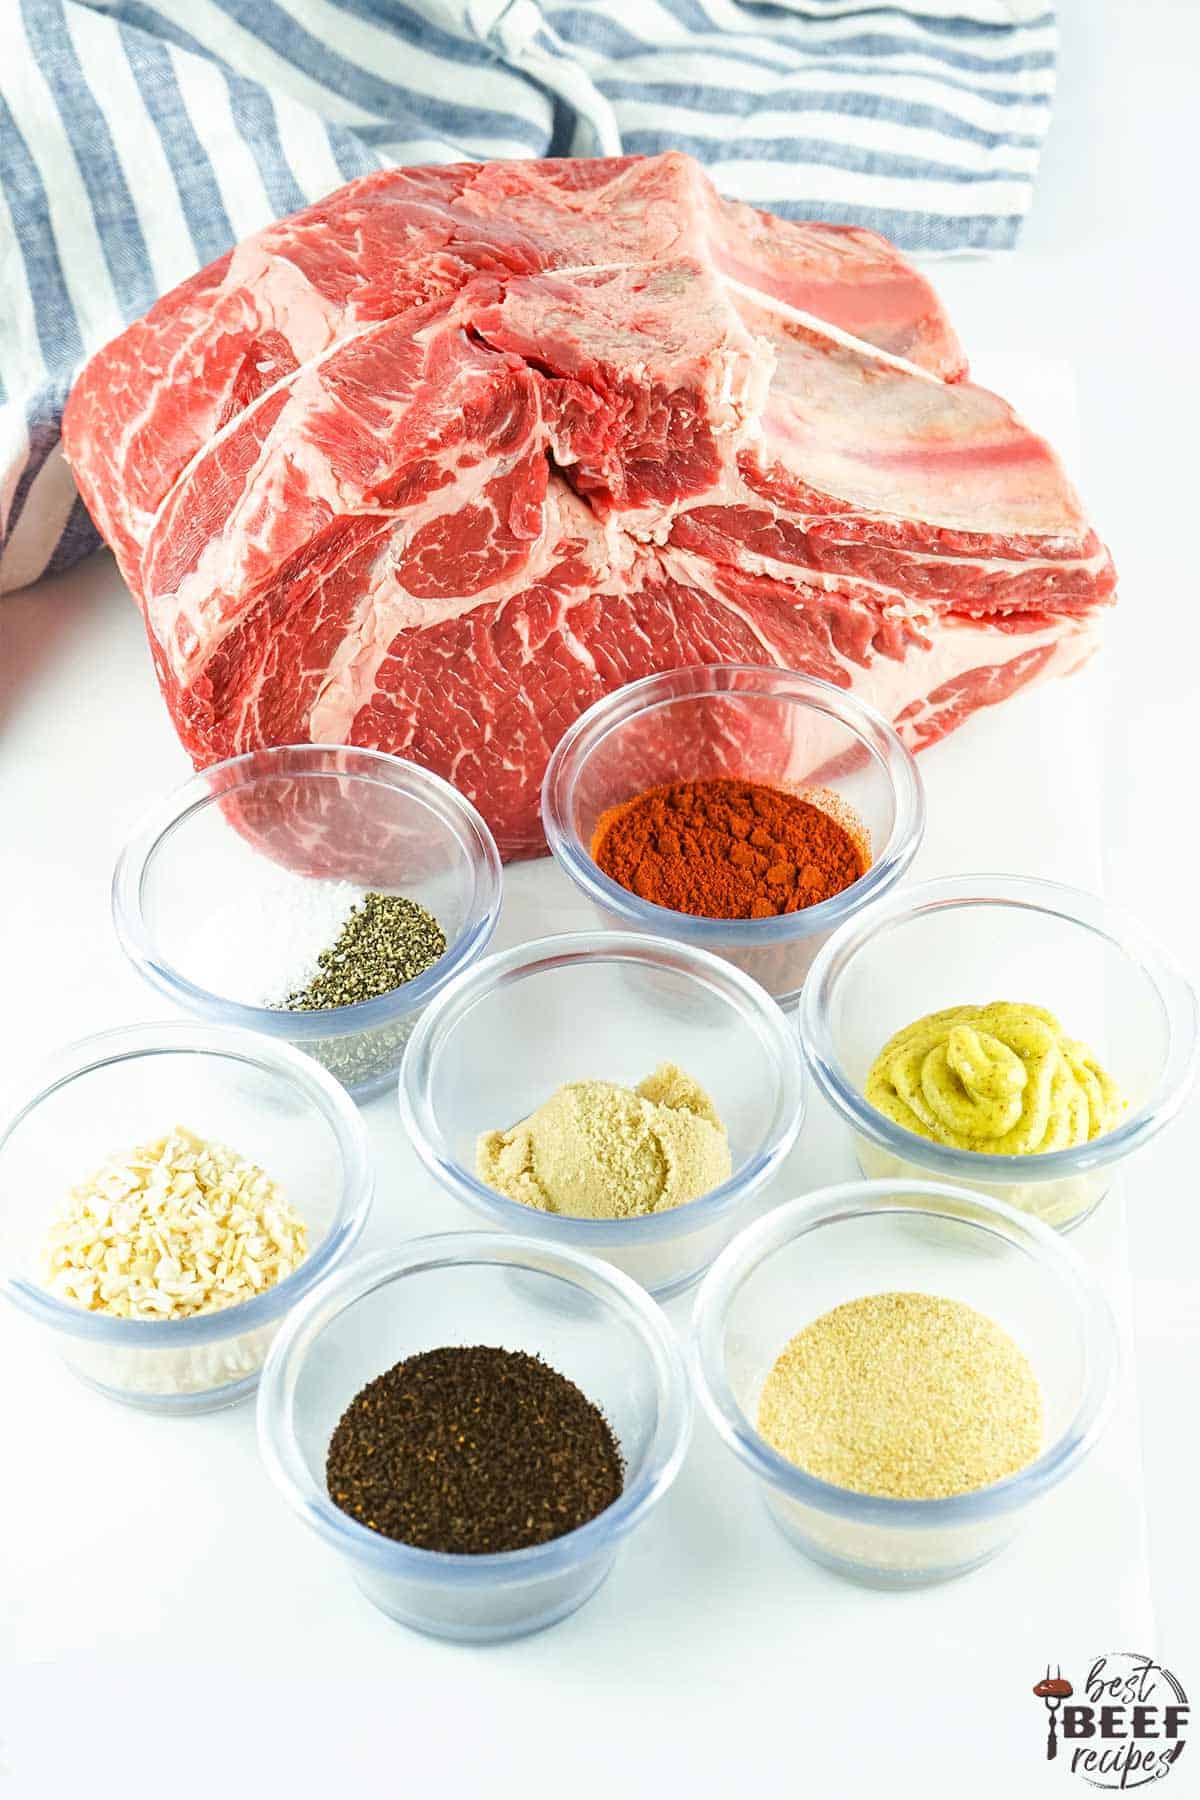 ingredients for prime rib roast on a white surface